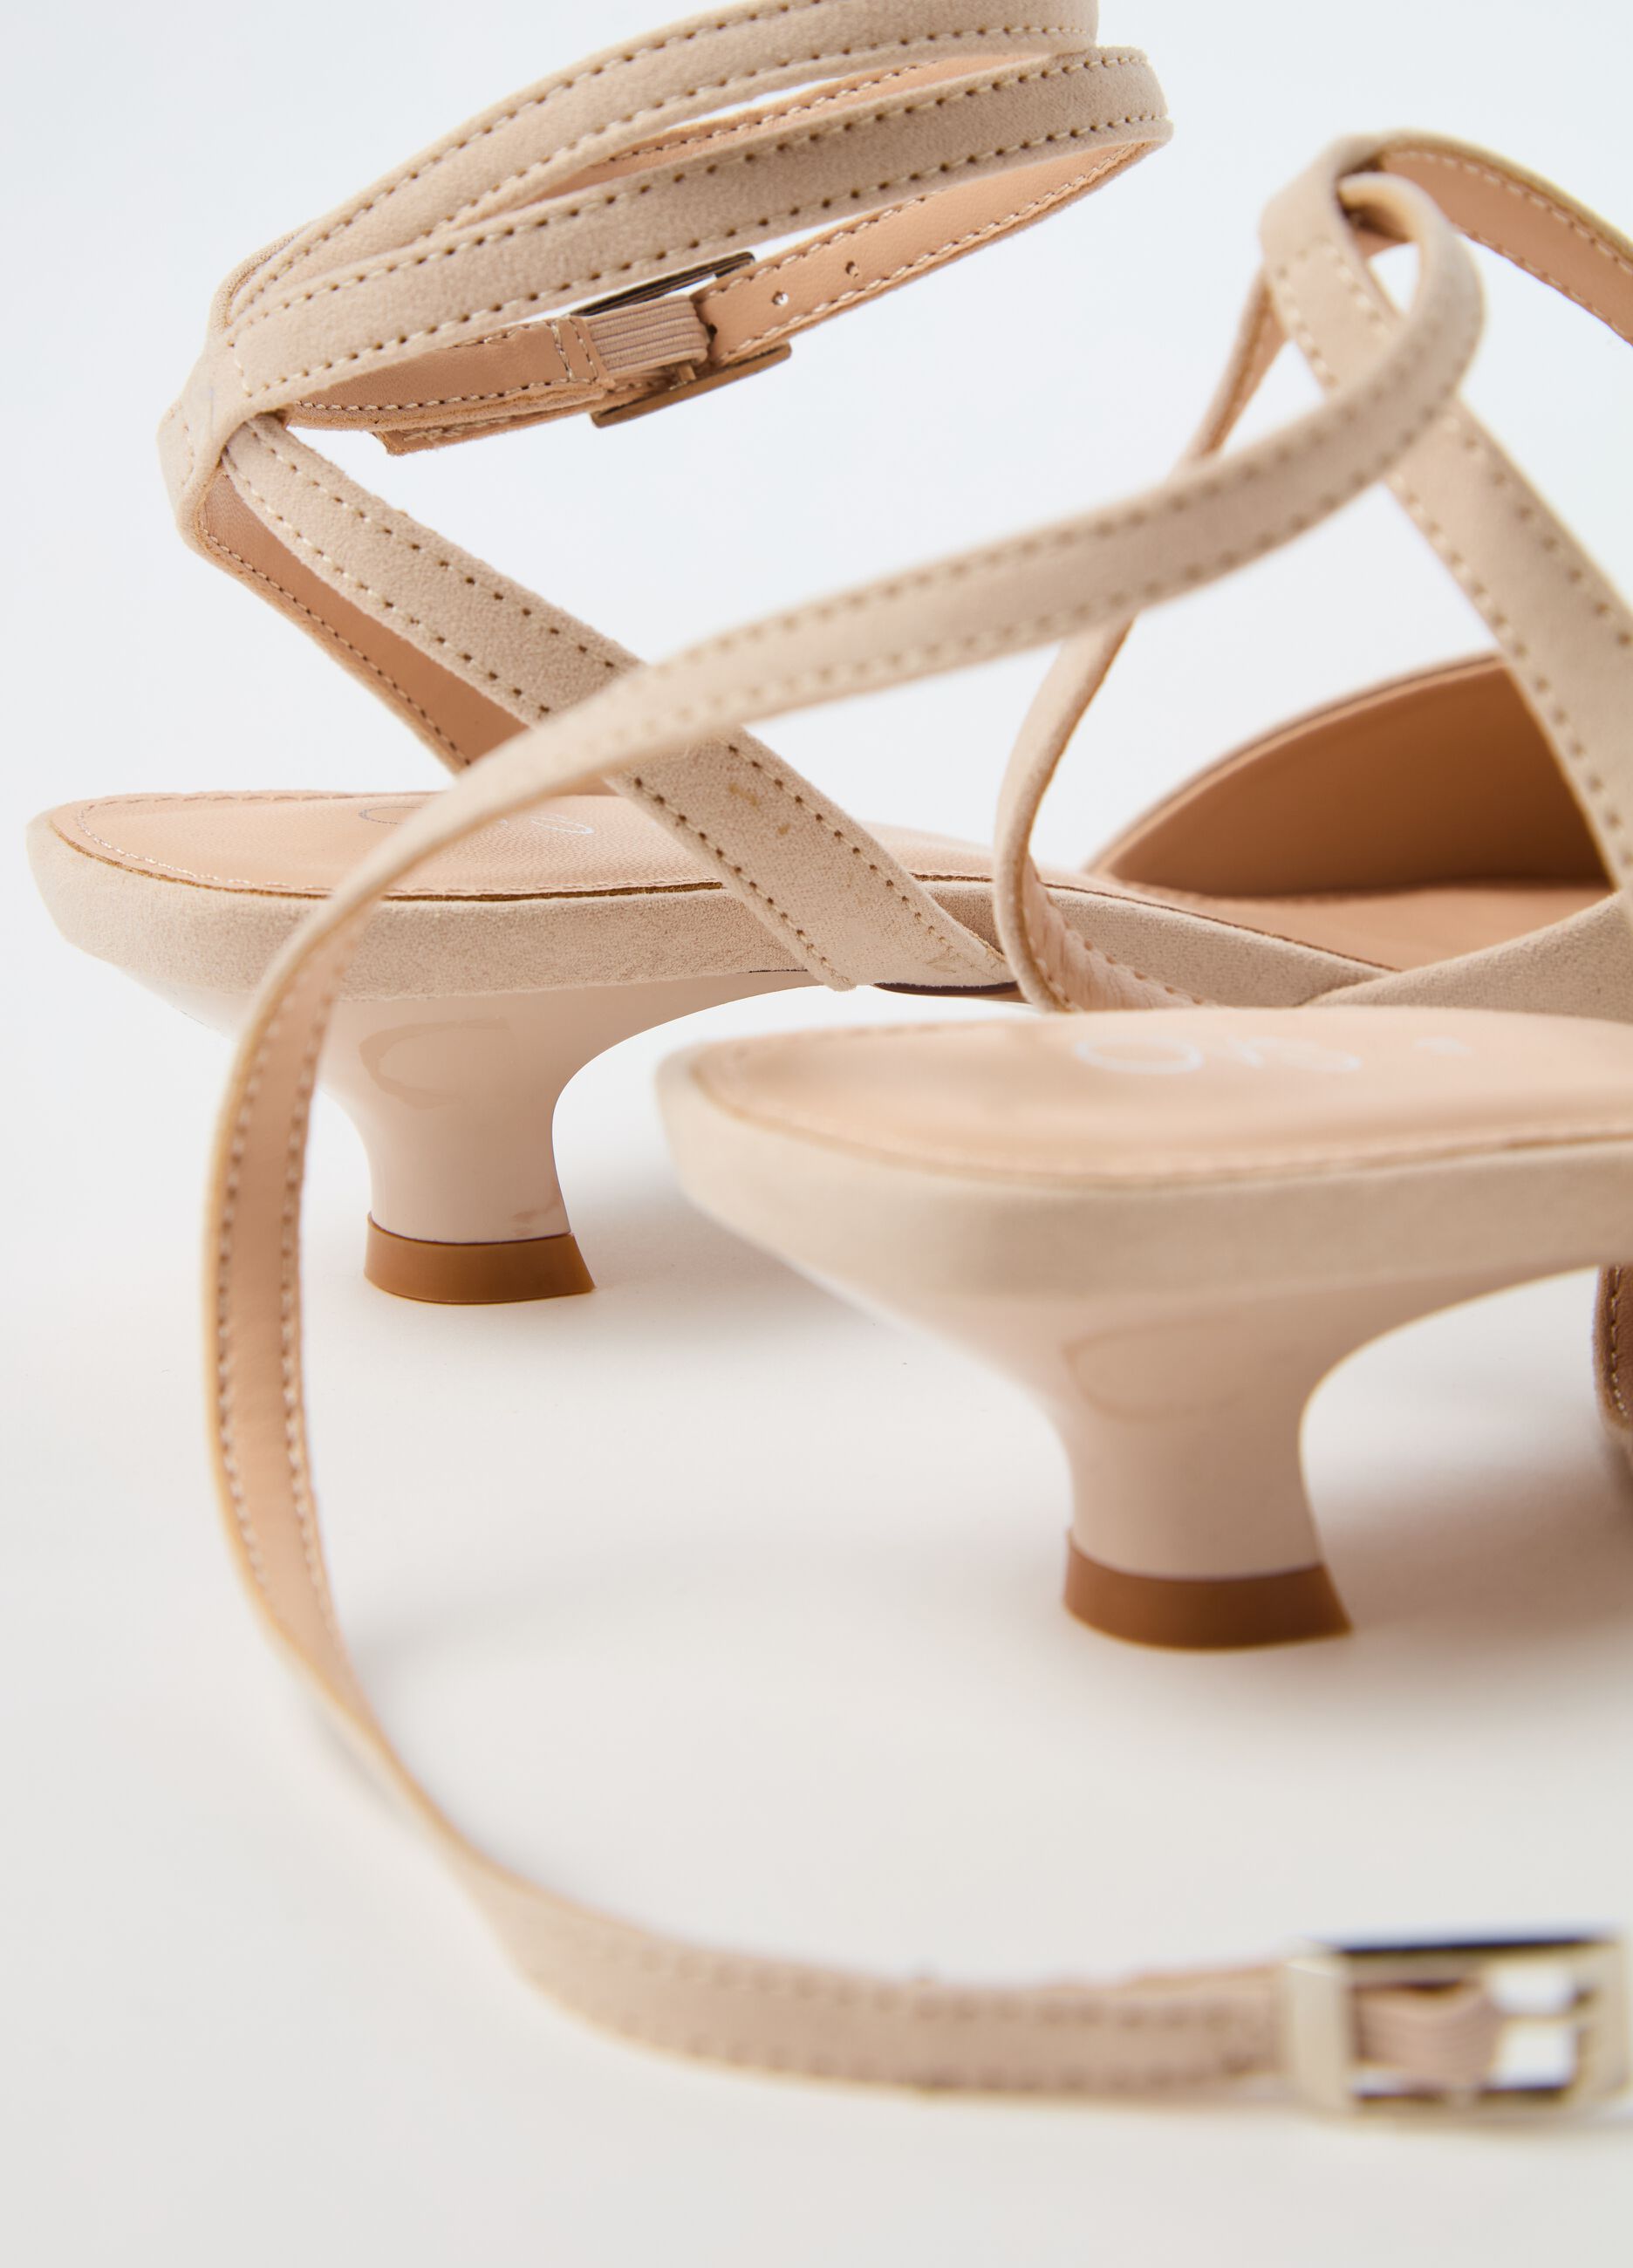 Suede sandals with strap